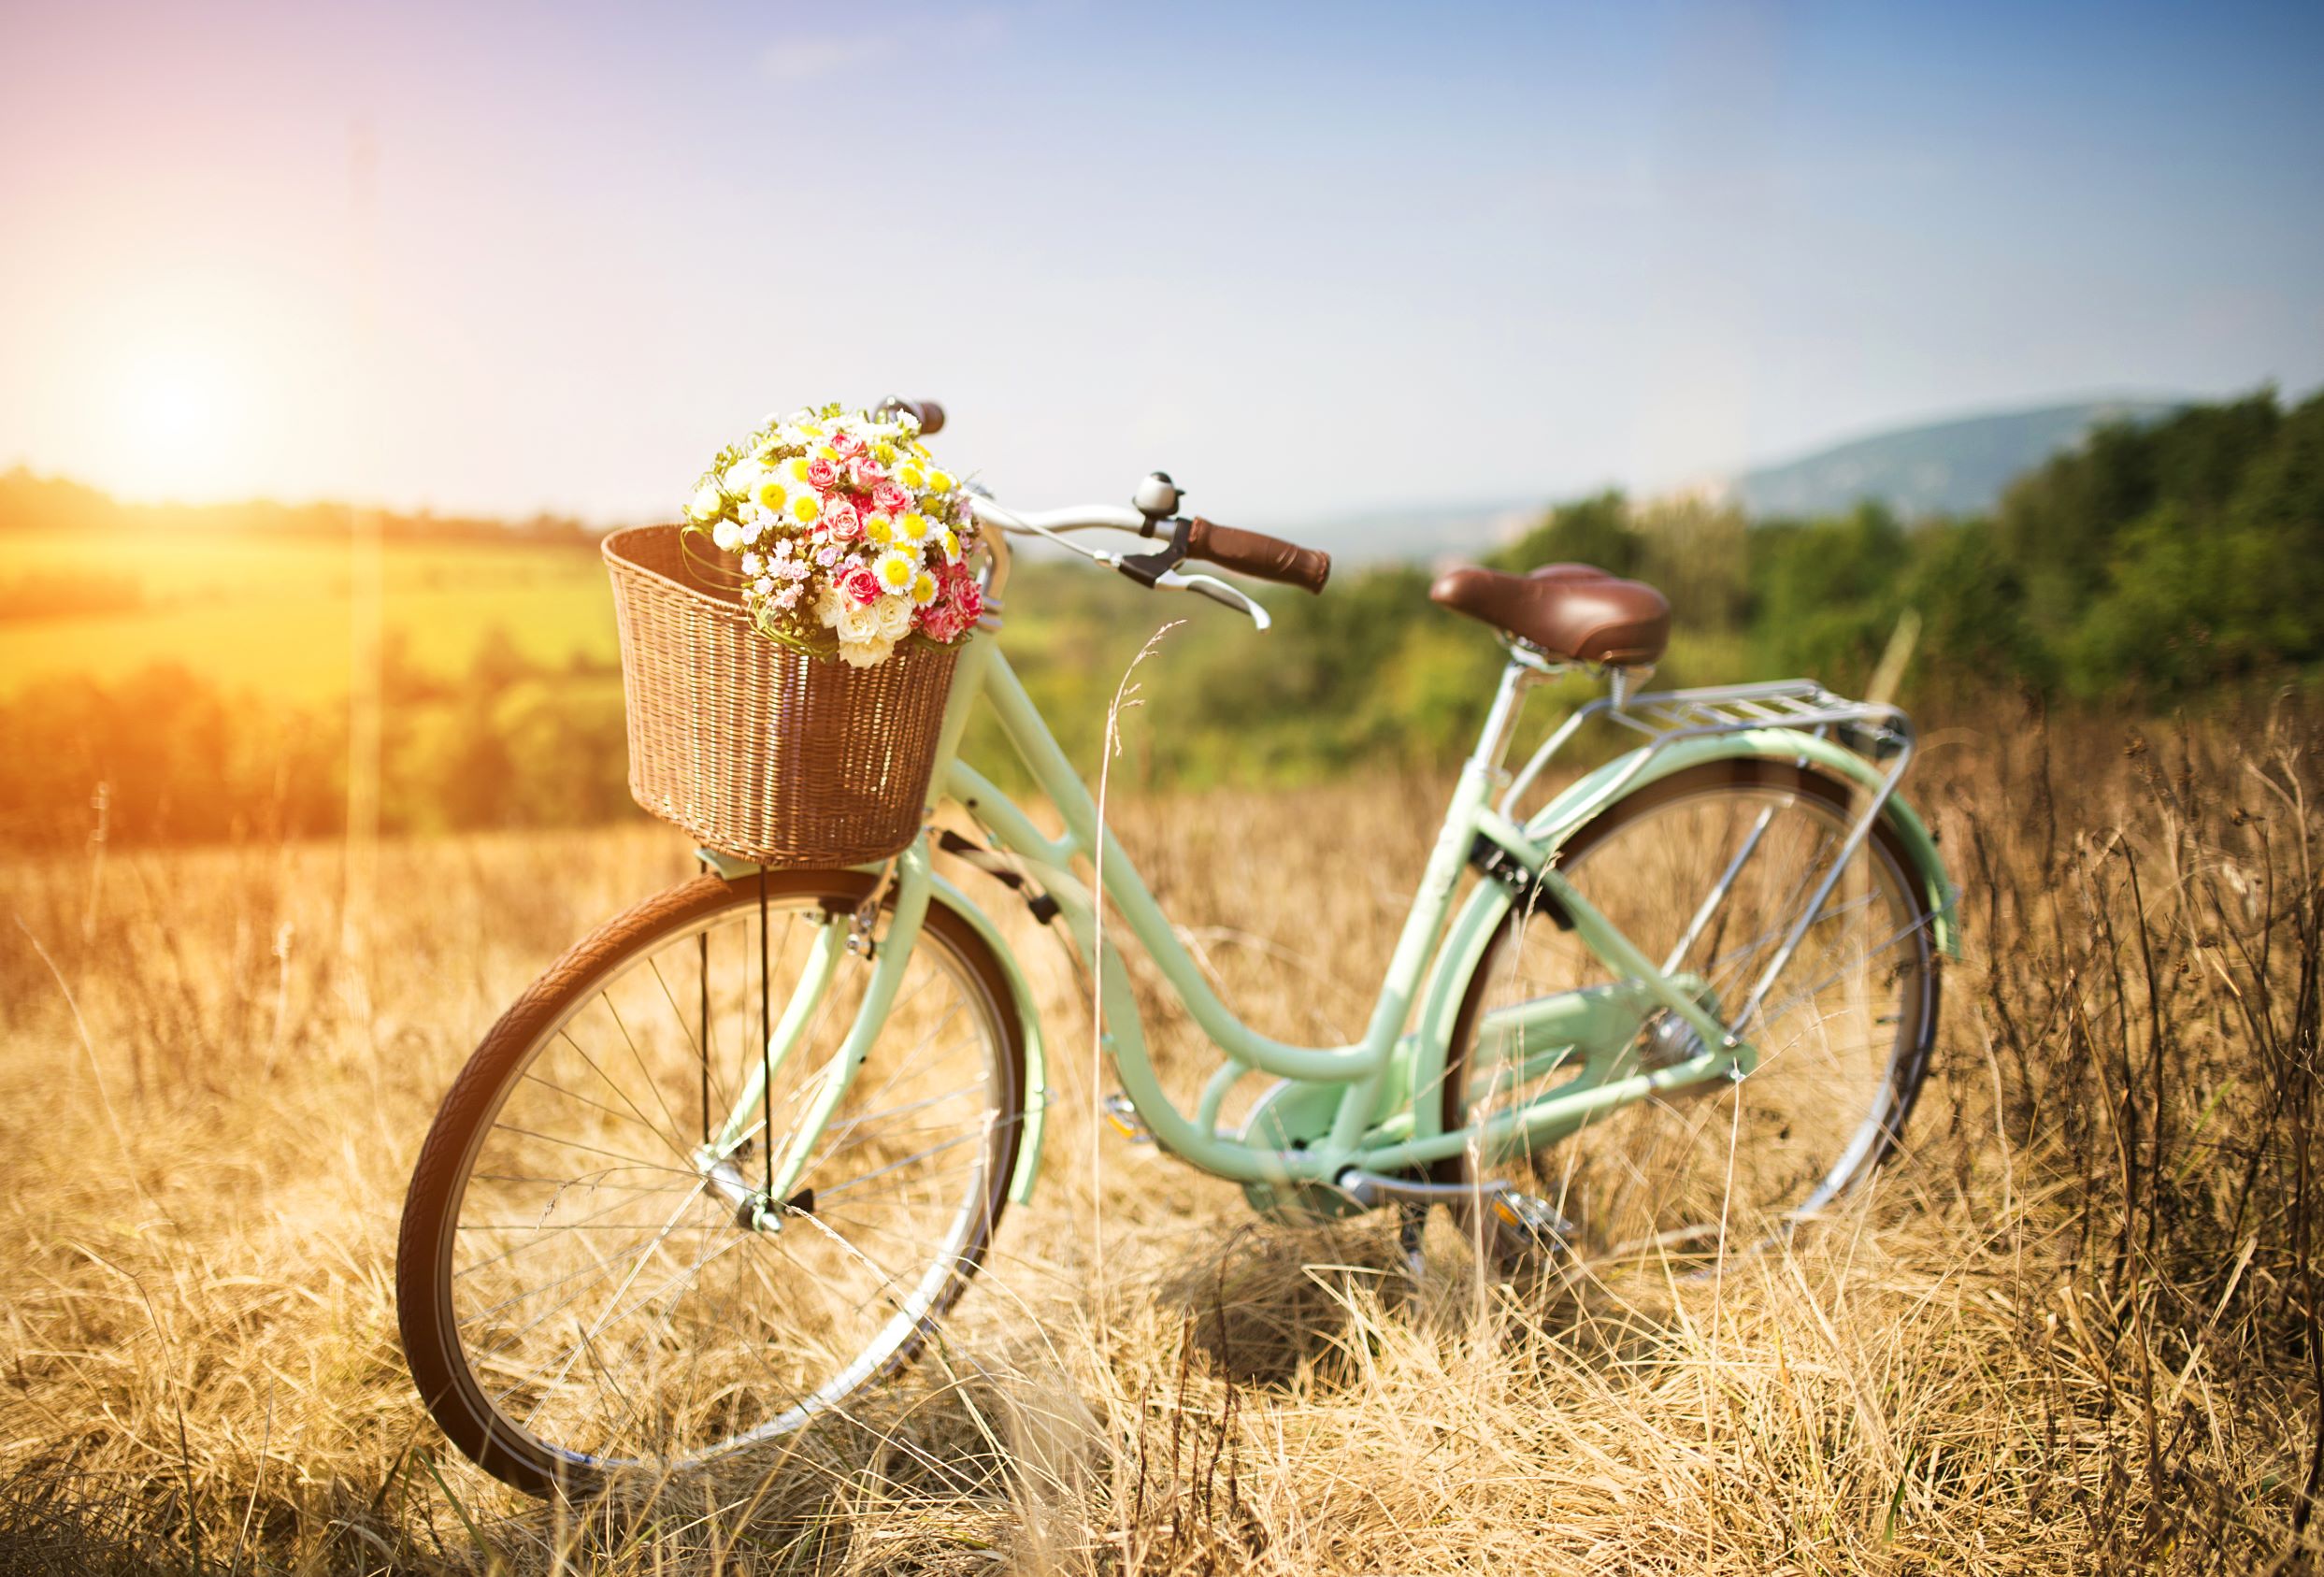 Vintage style retro bike with fenders, basket and flowers.